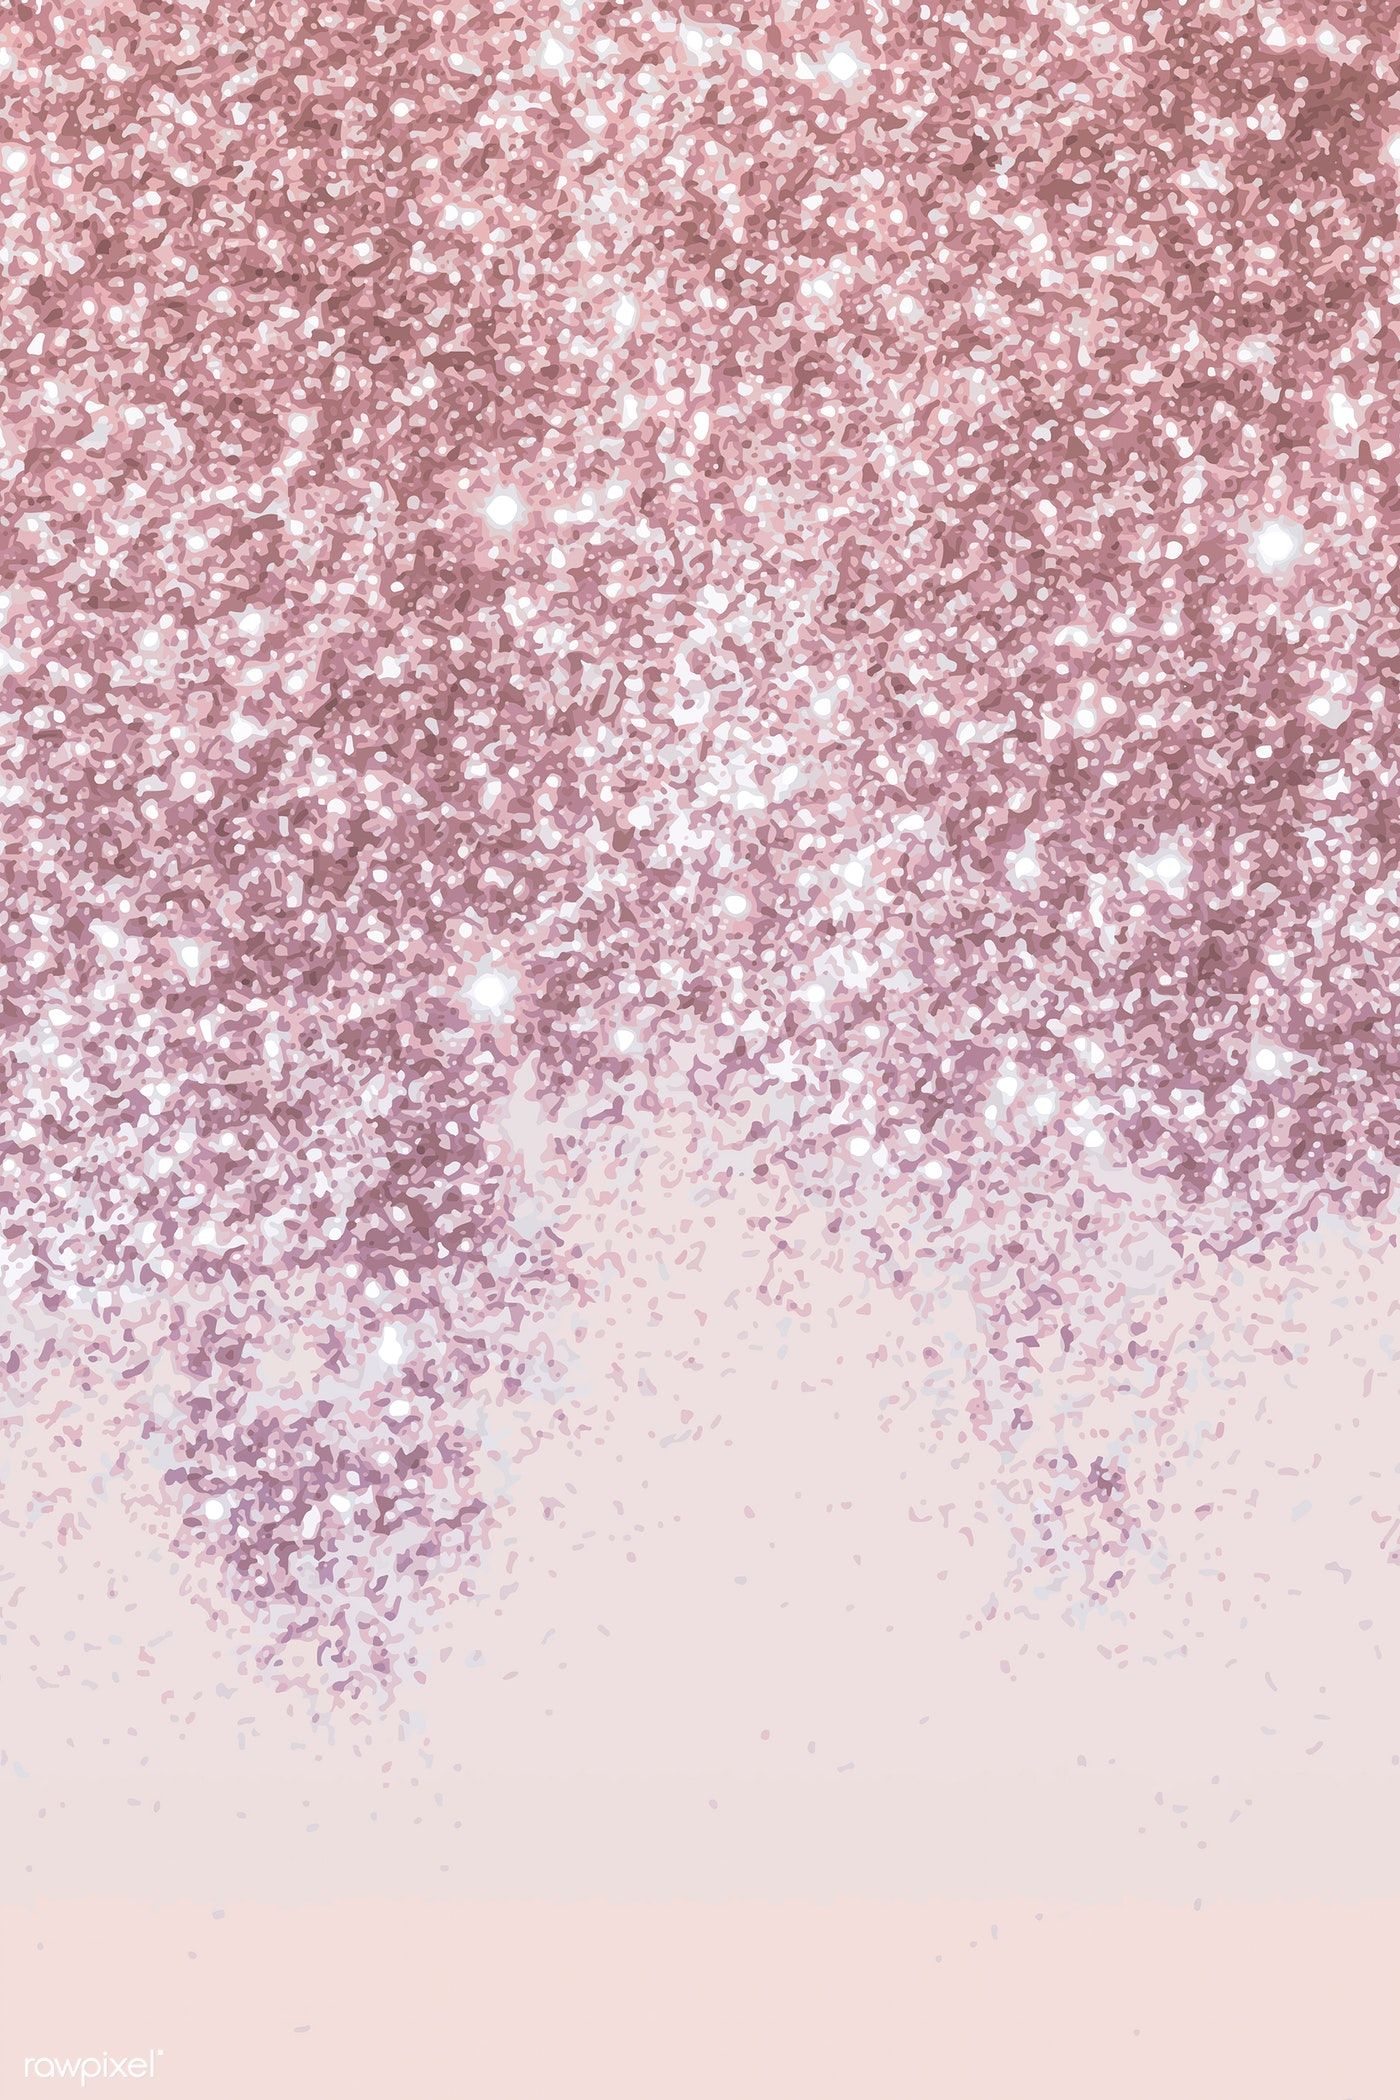 Download premium vector of Pink gold glittery pattern background 1400x2100